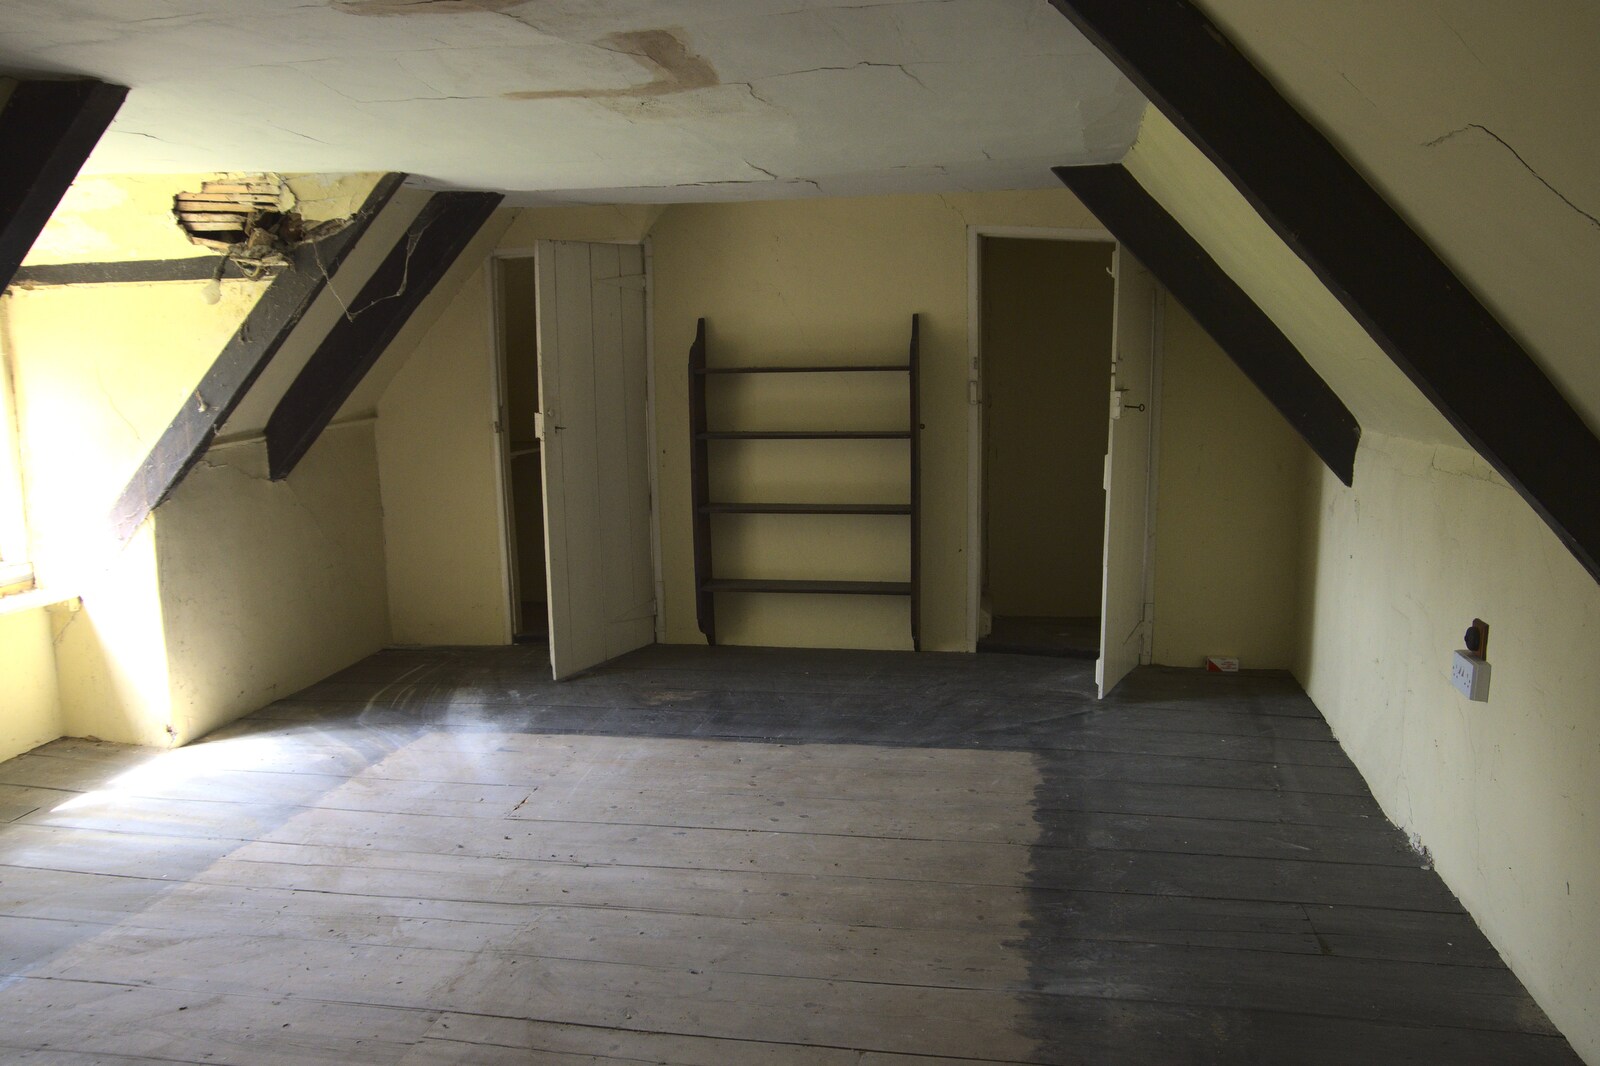 One of the upstairs attic rooms from A 1940s Timewarp, Site 4, Bungay Airfield, Flixton, Suffolk - 9th June 2022